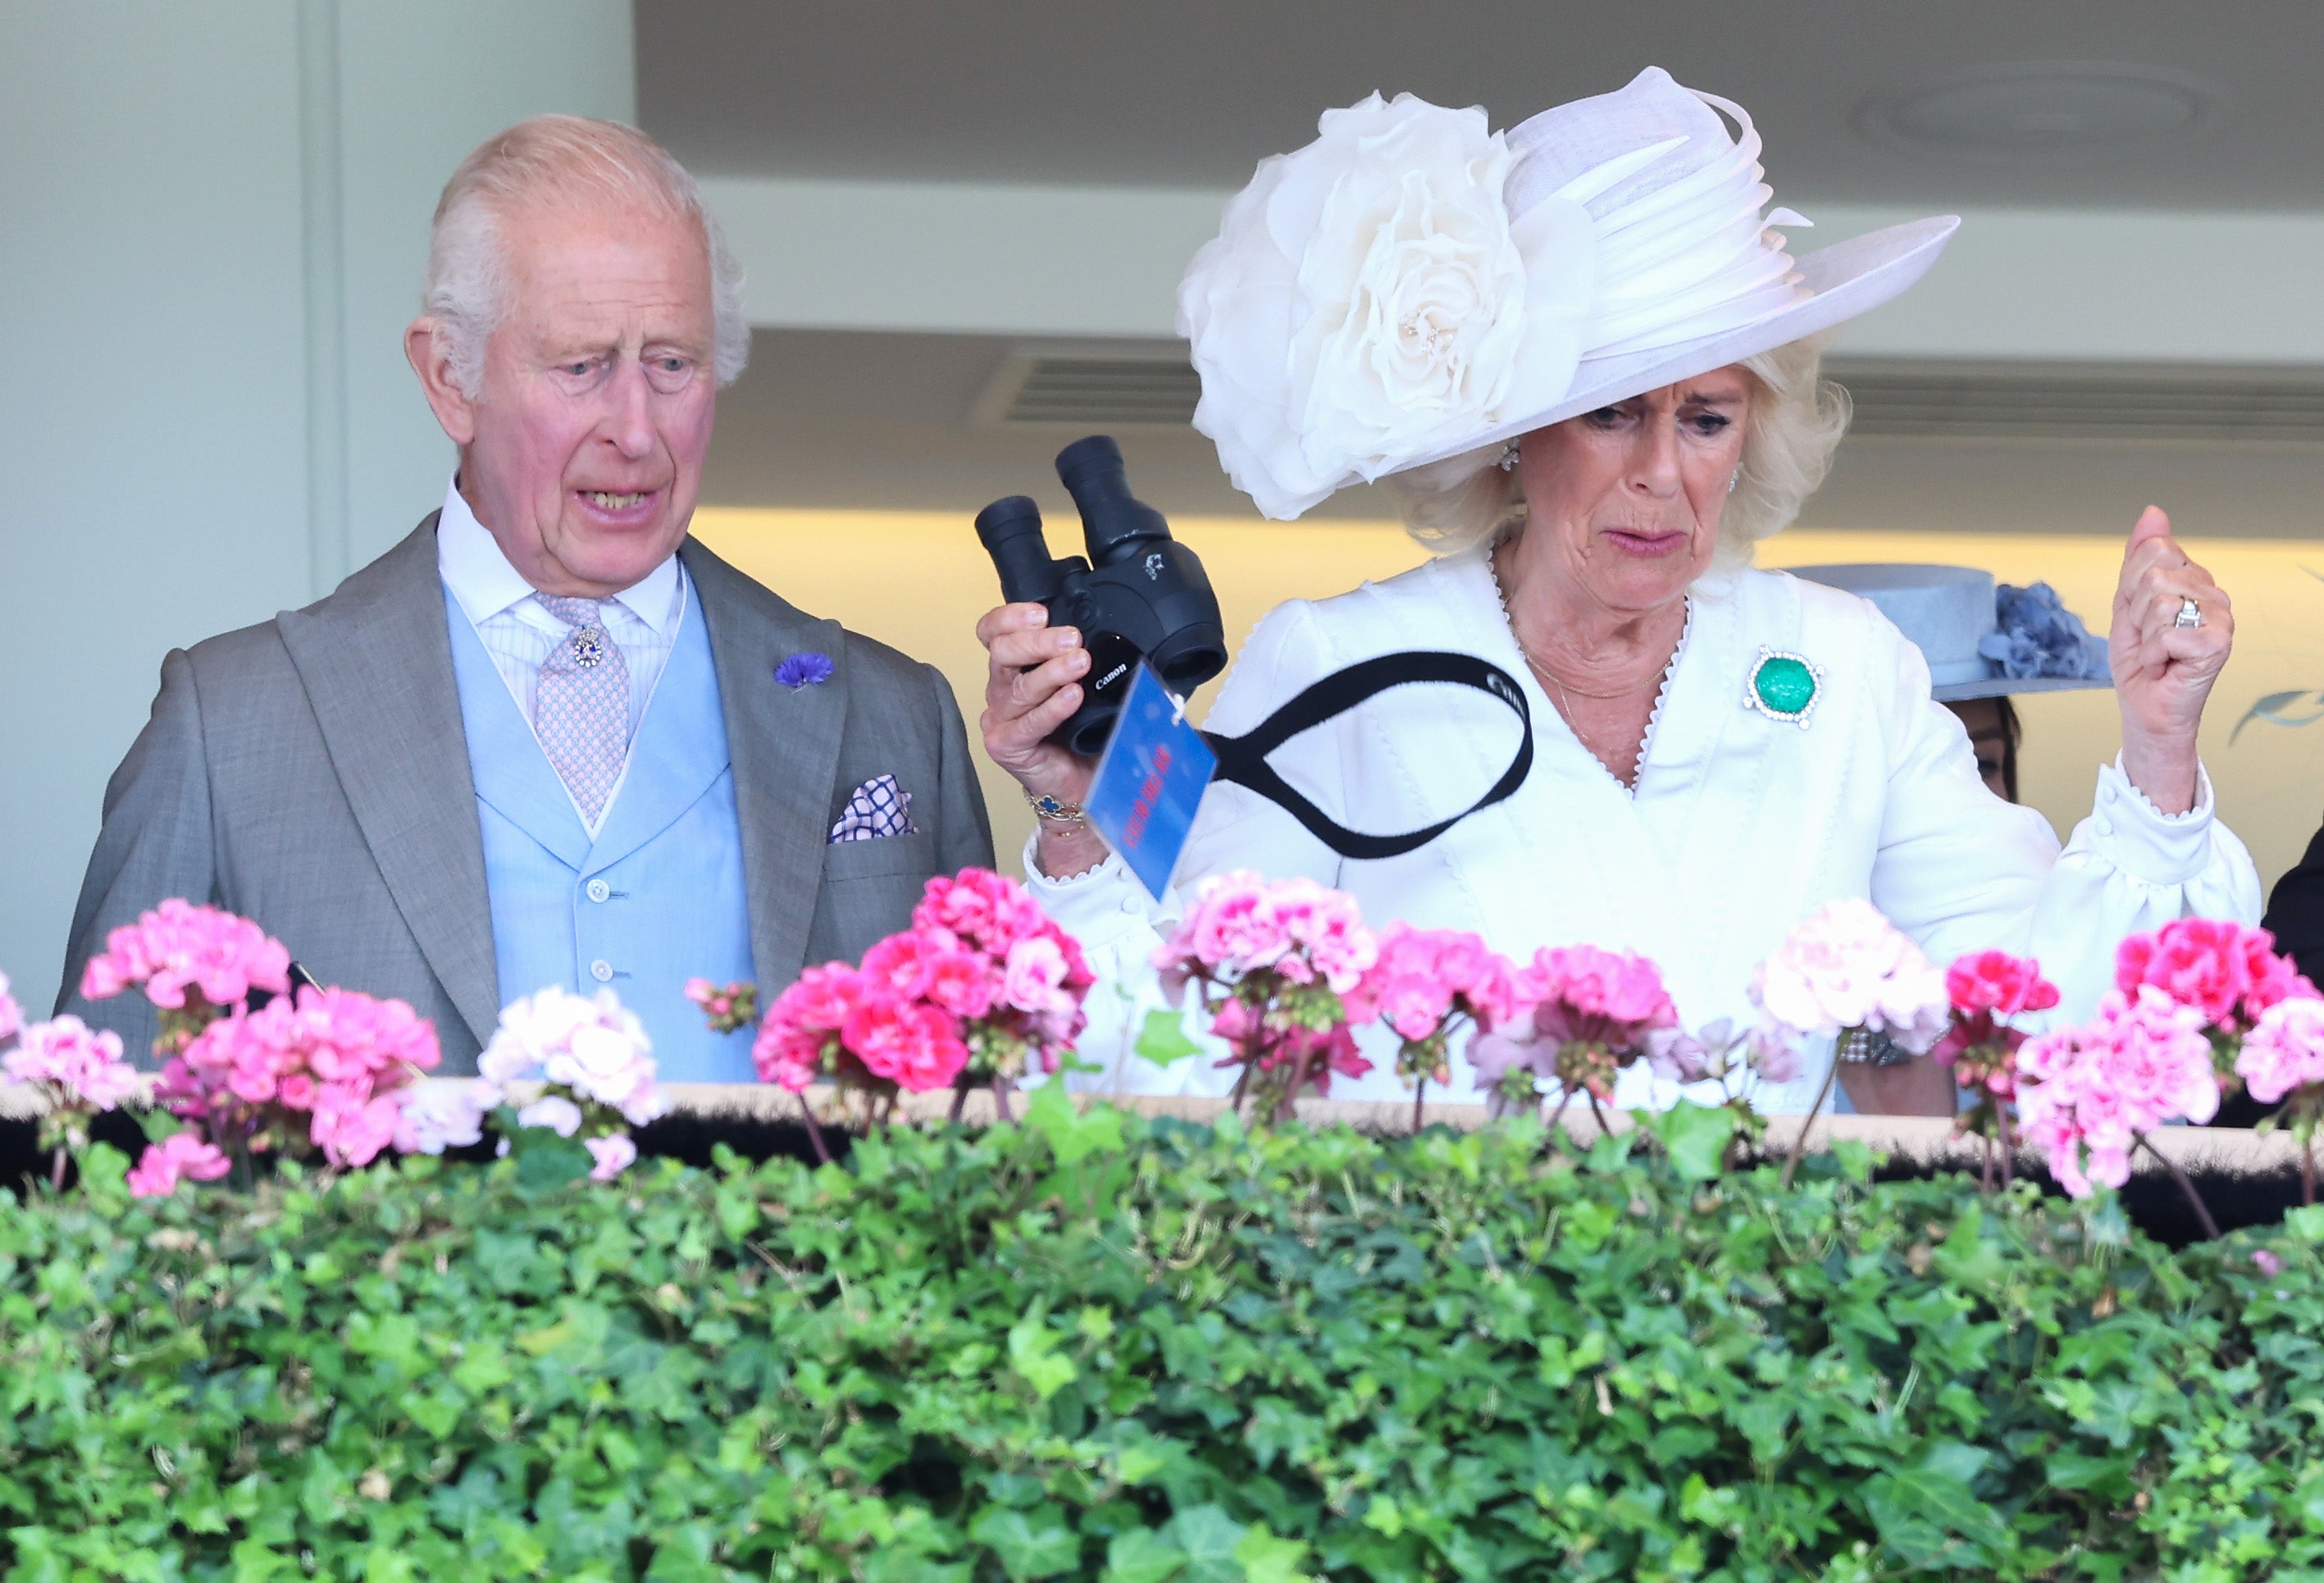 The Queen could not hide her disappointment at day three of Royal Ascot.